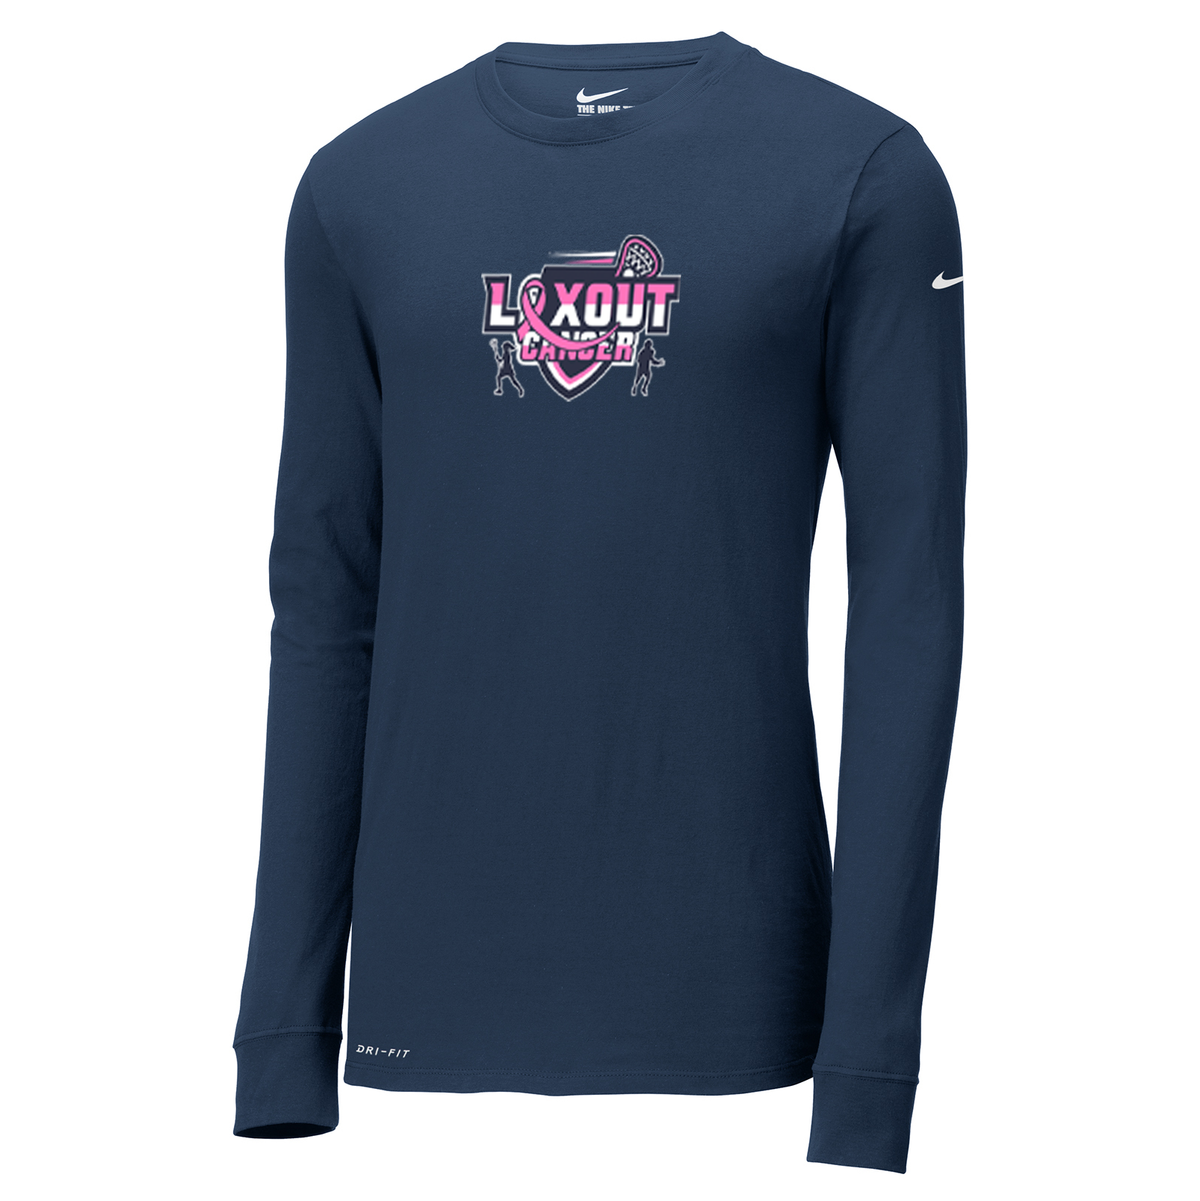 LaxOut Cancer Nike Dri-FIT Long Sleeve Tee